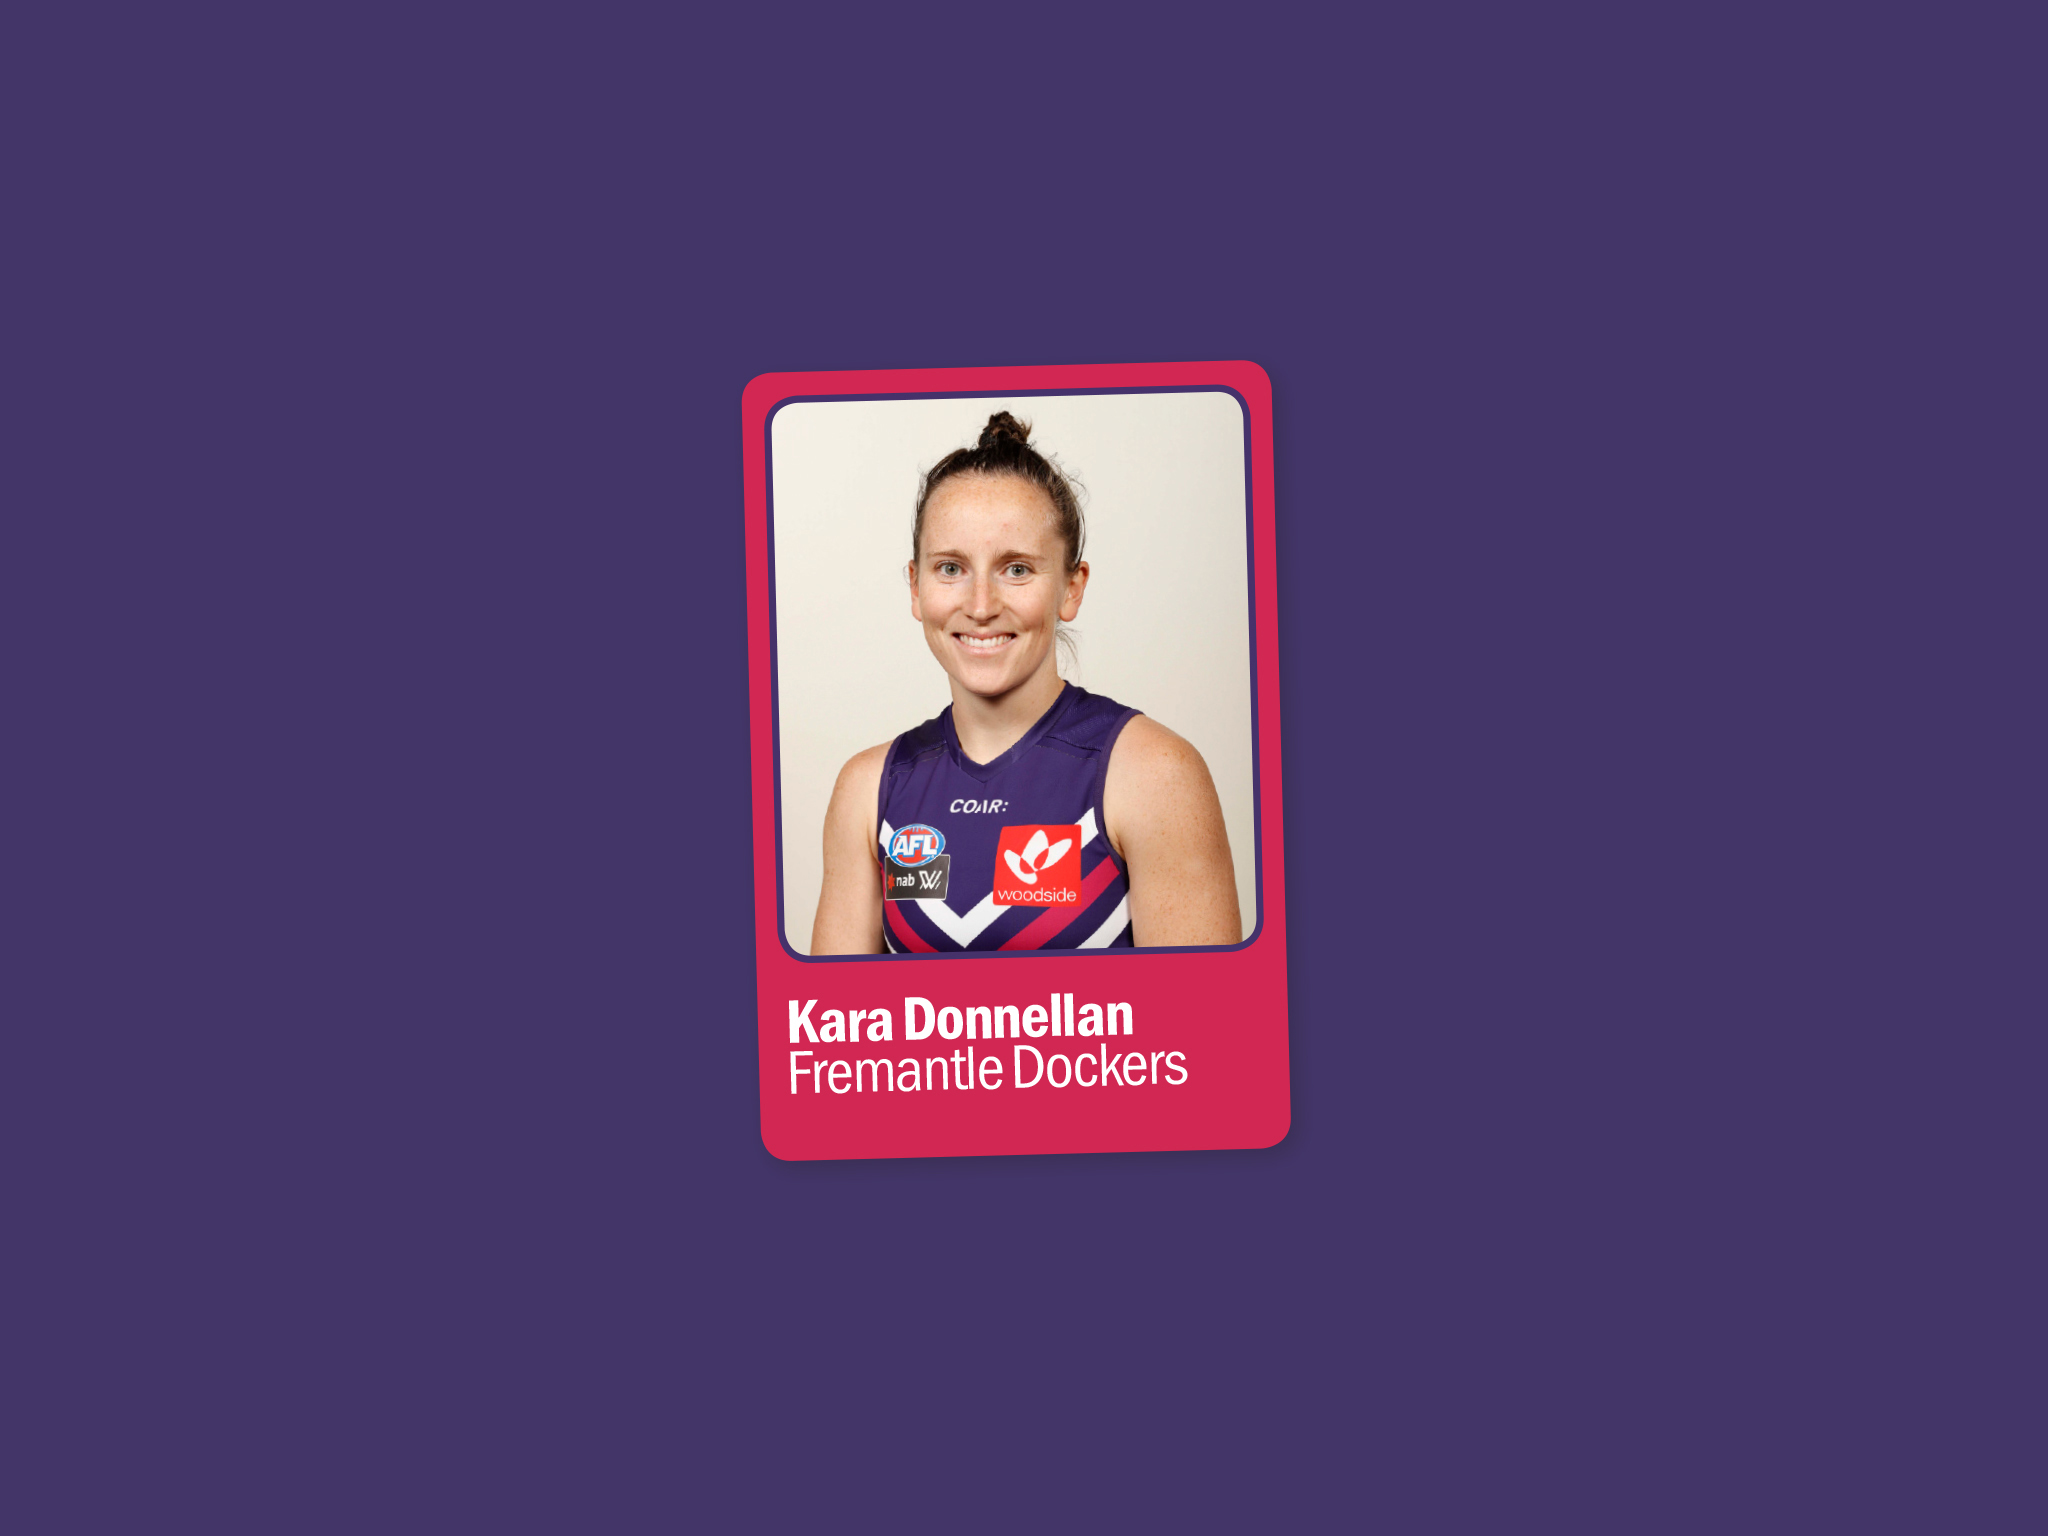 Meet The Fearless Team Leaders Of The Professional Womens AFL